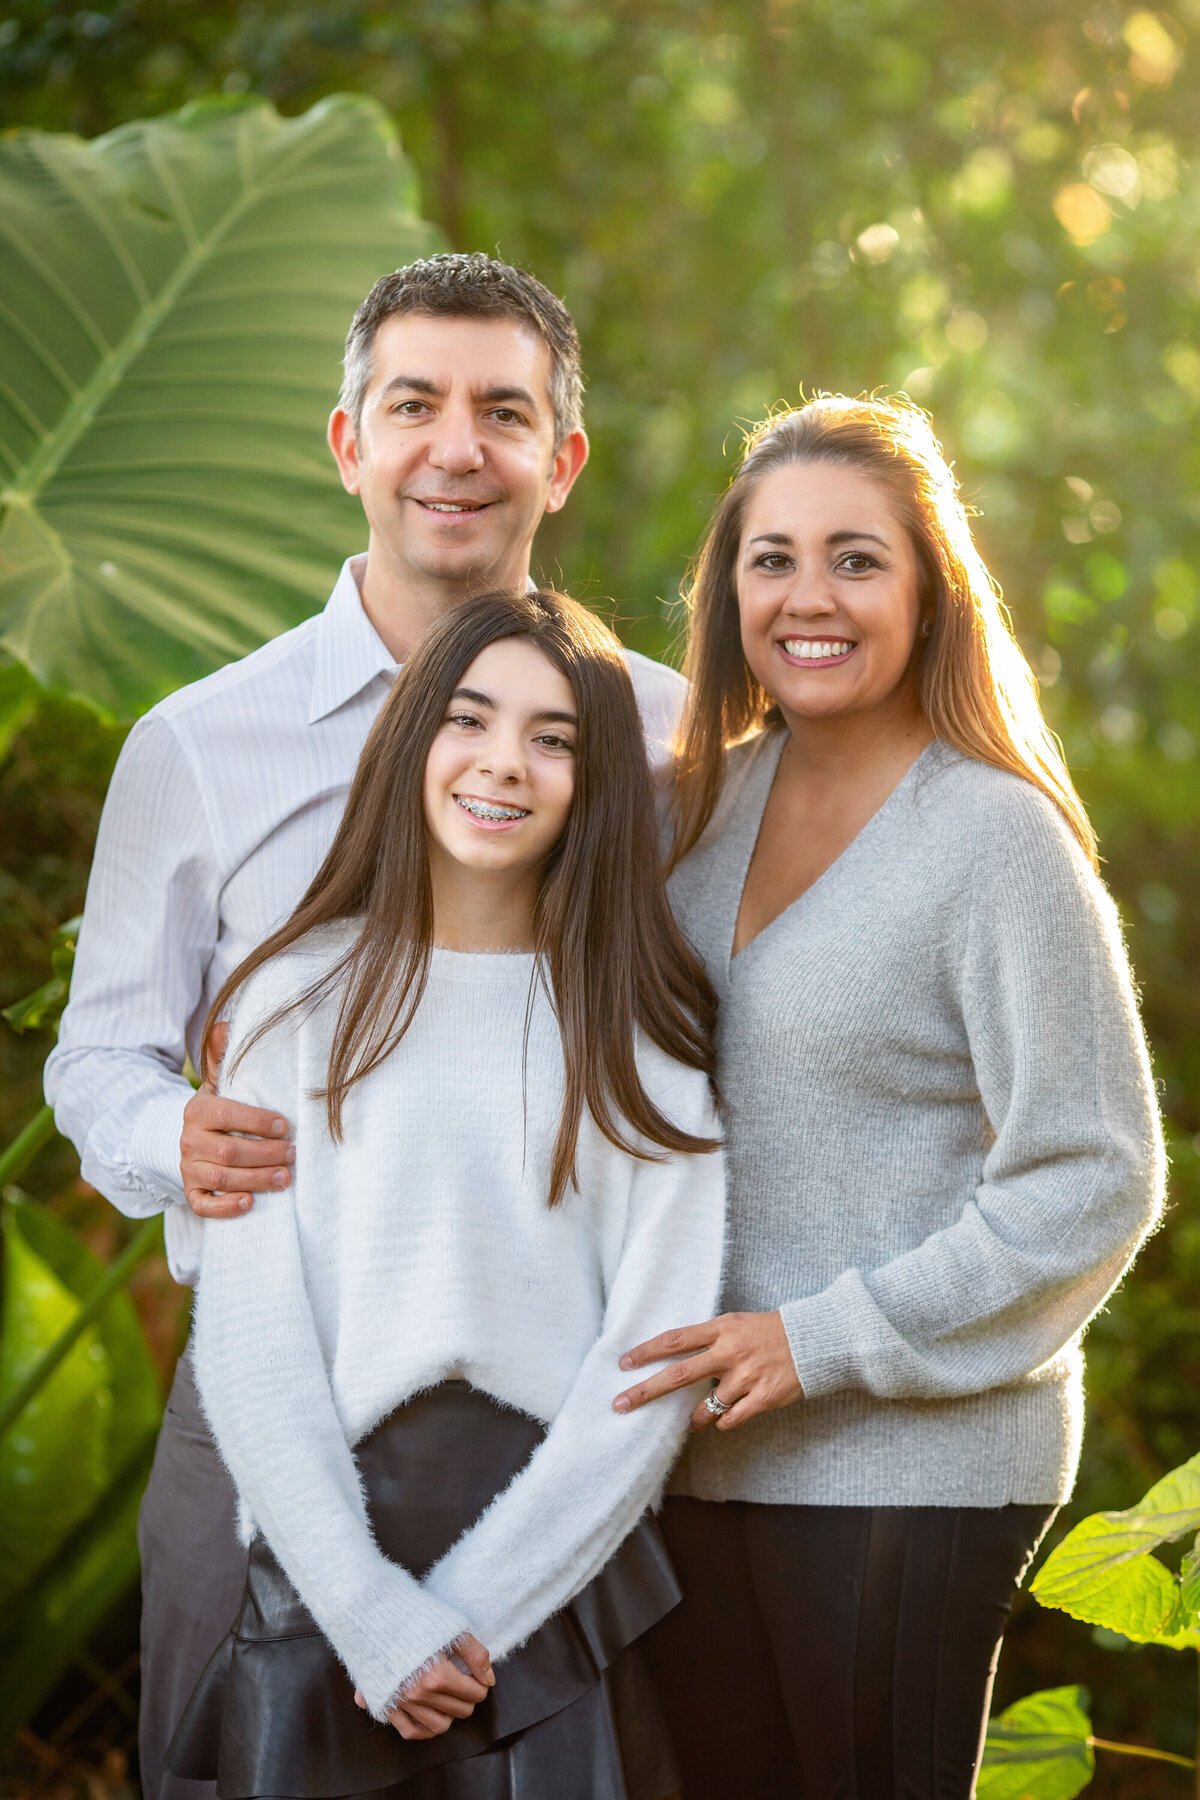 Family of 3, backlit in a jungle-like setting.  Daughter and mom have long brown hair.  They are wearing sweaters and black pants.  Dad is wearing a gray shirt.